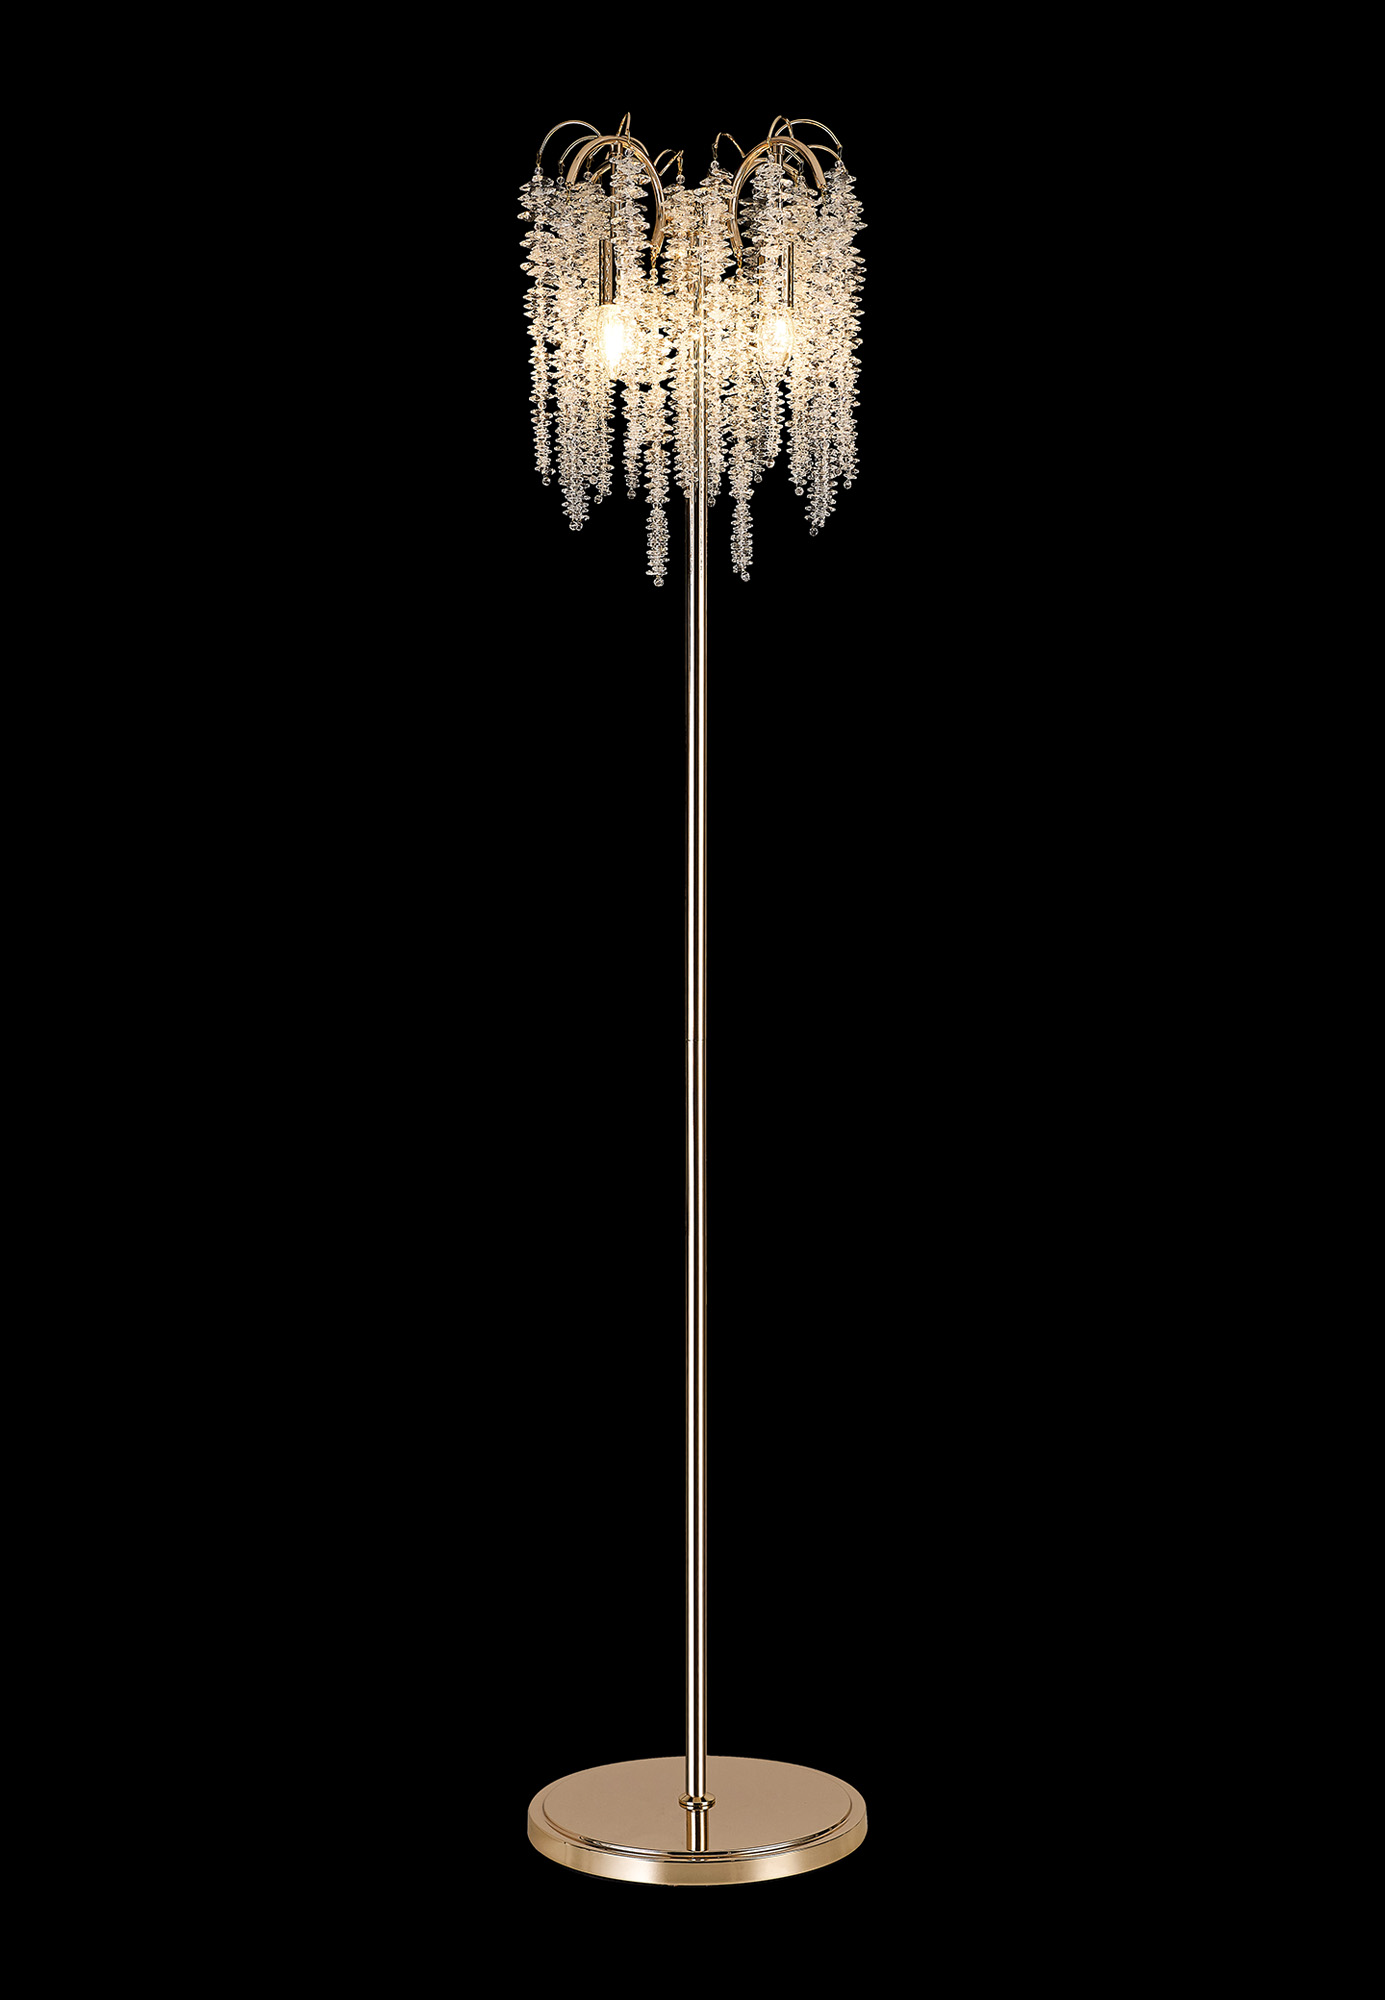 IL32901  Wisteria 165cm Floor Lamp 4 Light French Gold